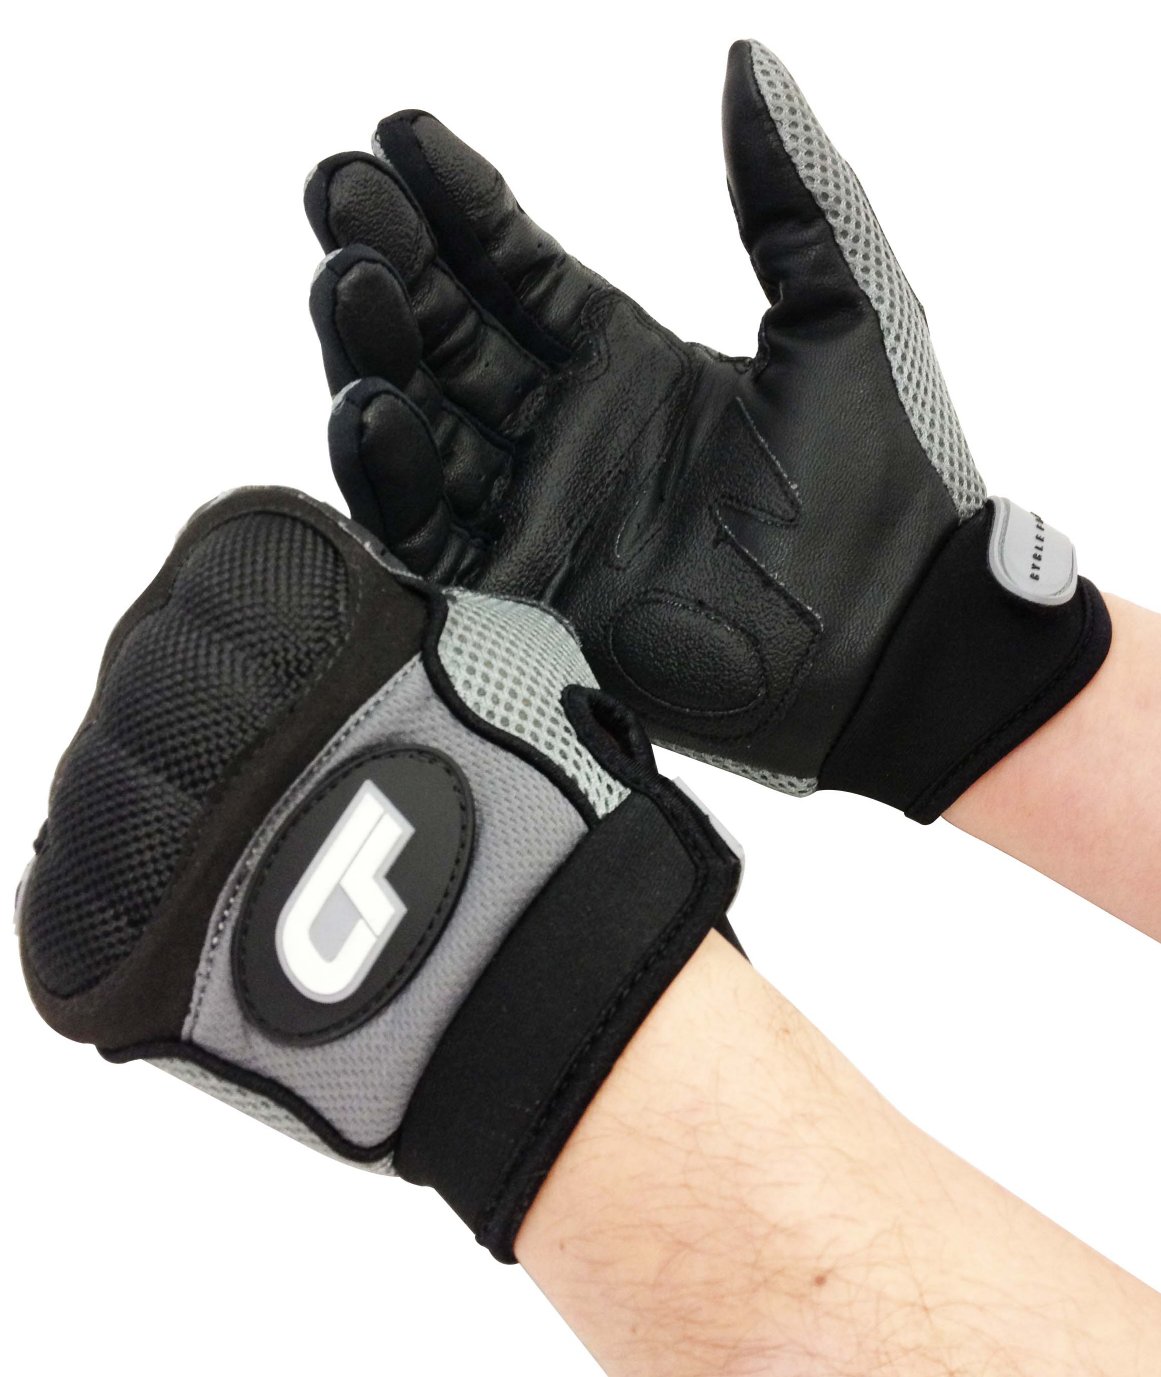 Cycle Force Full Fingered Tactical Police Bicycle Gloves